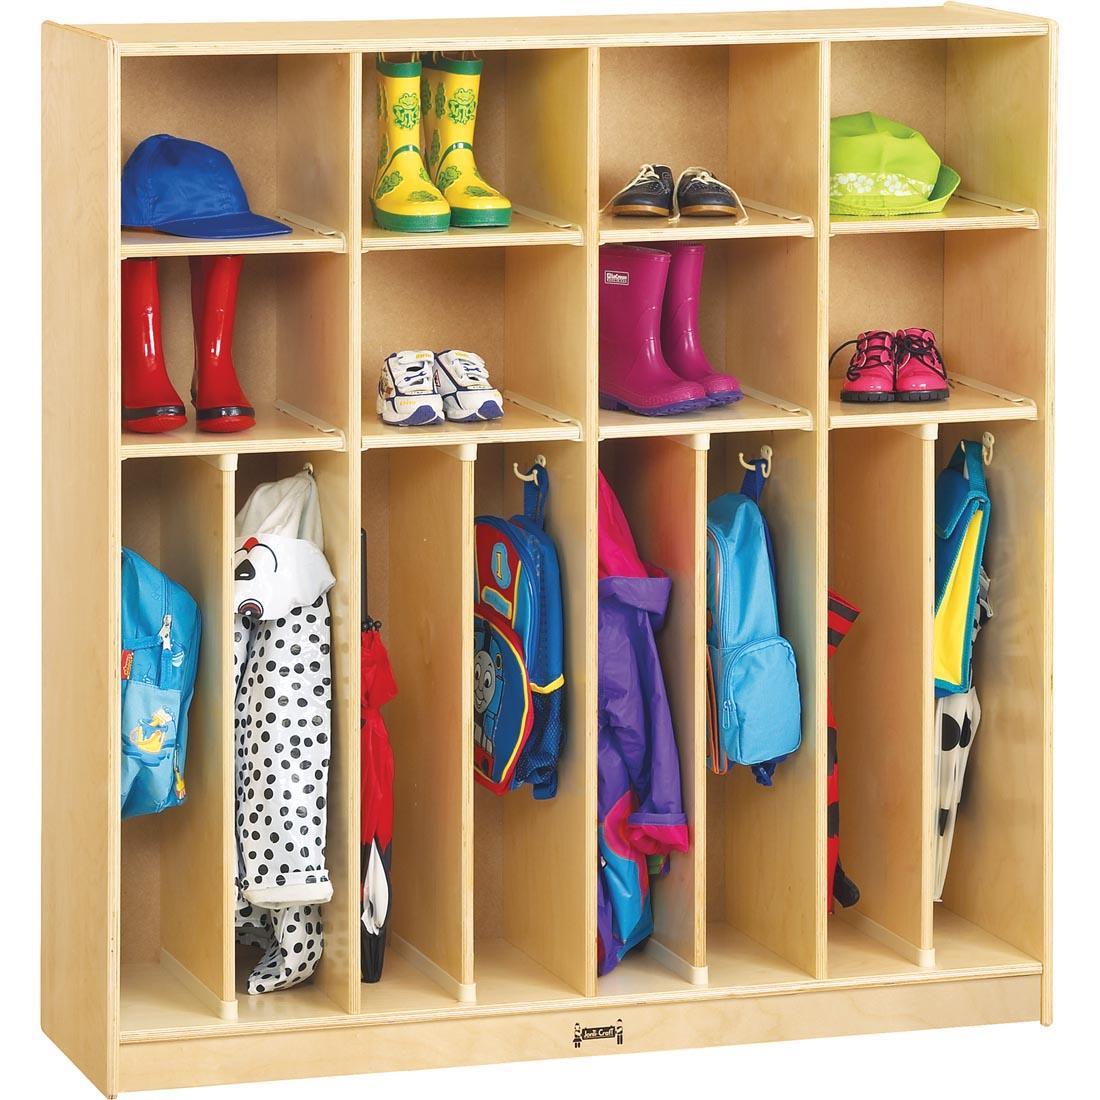 Neat-n-Trim Lockers shown with suggested storage contents